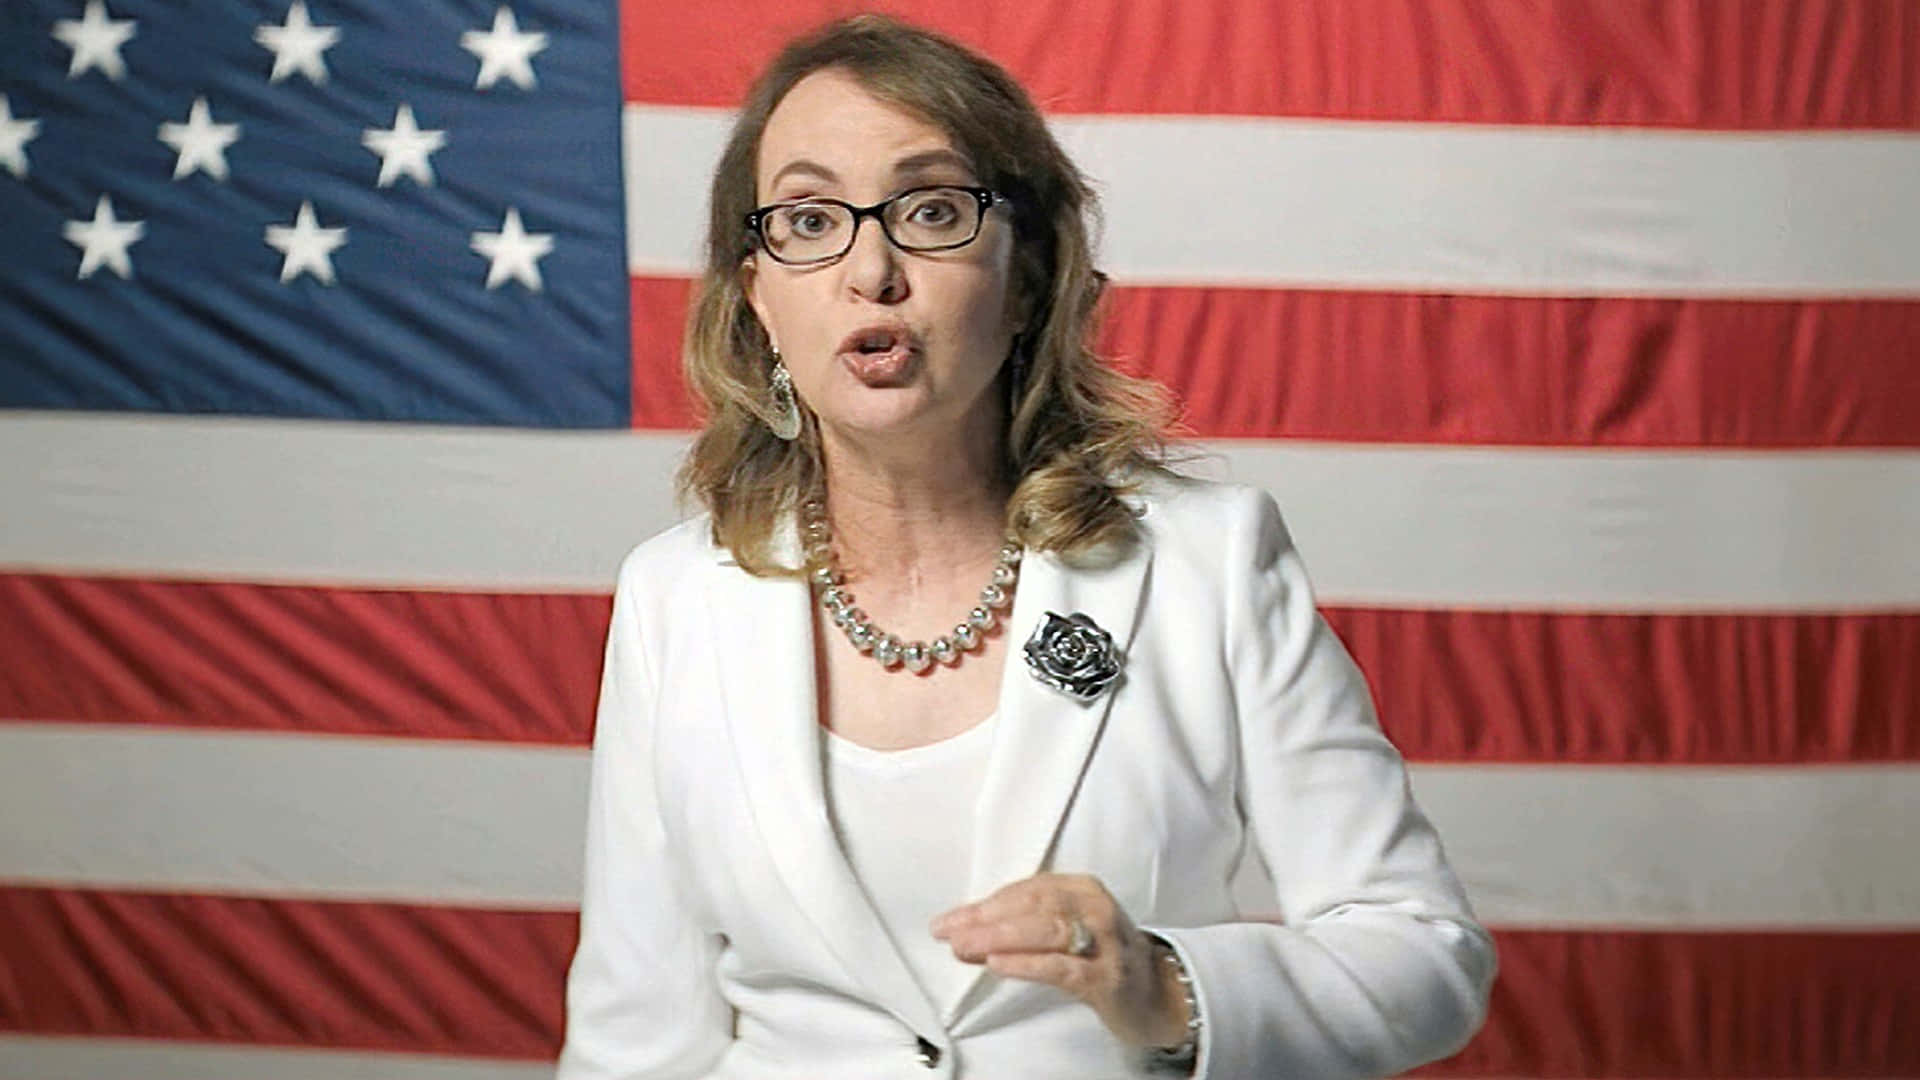 Caption: Gabrielle Giffords Delivering A Powerful Speech At A Public Event Wallpaper